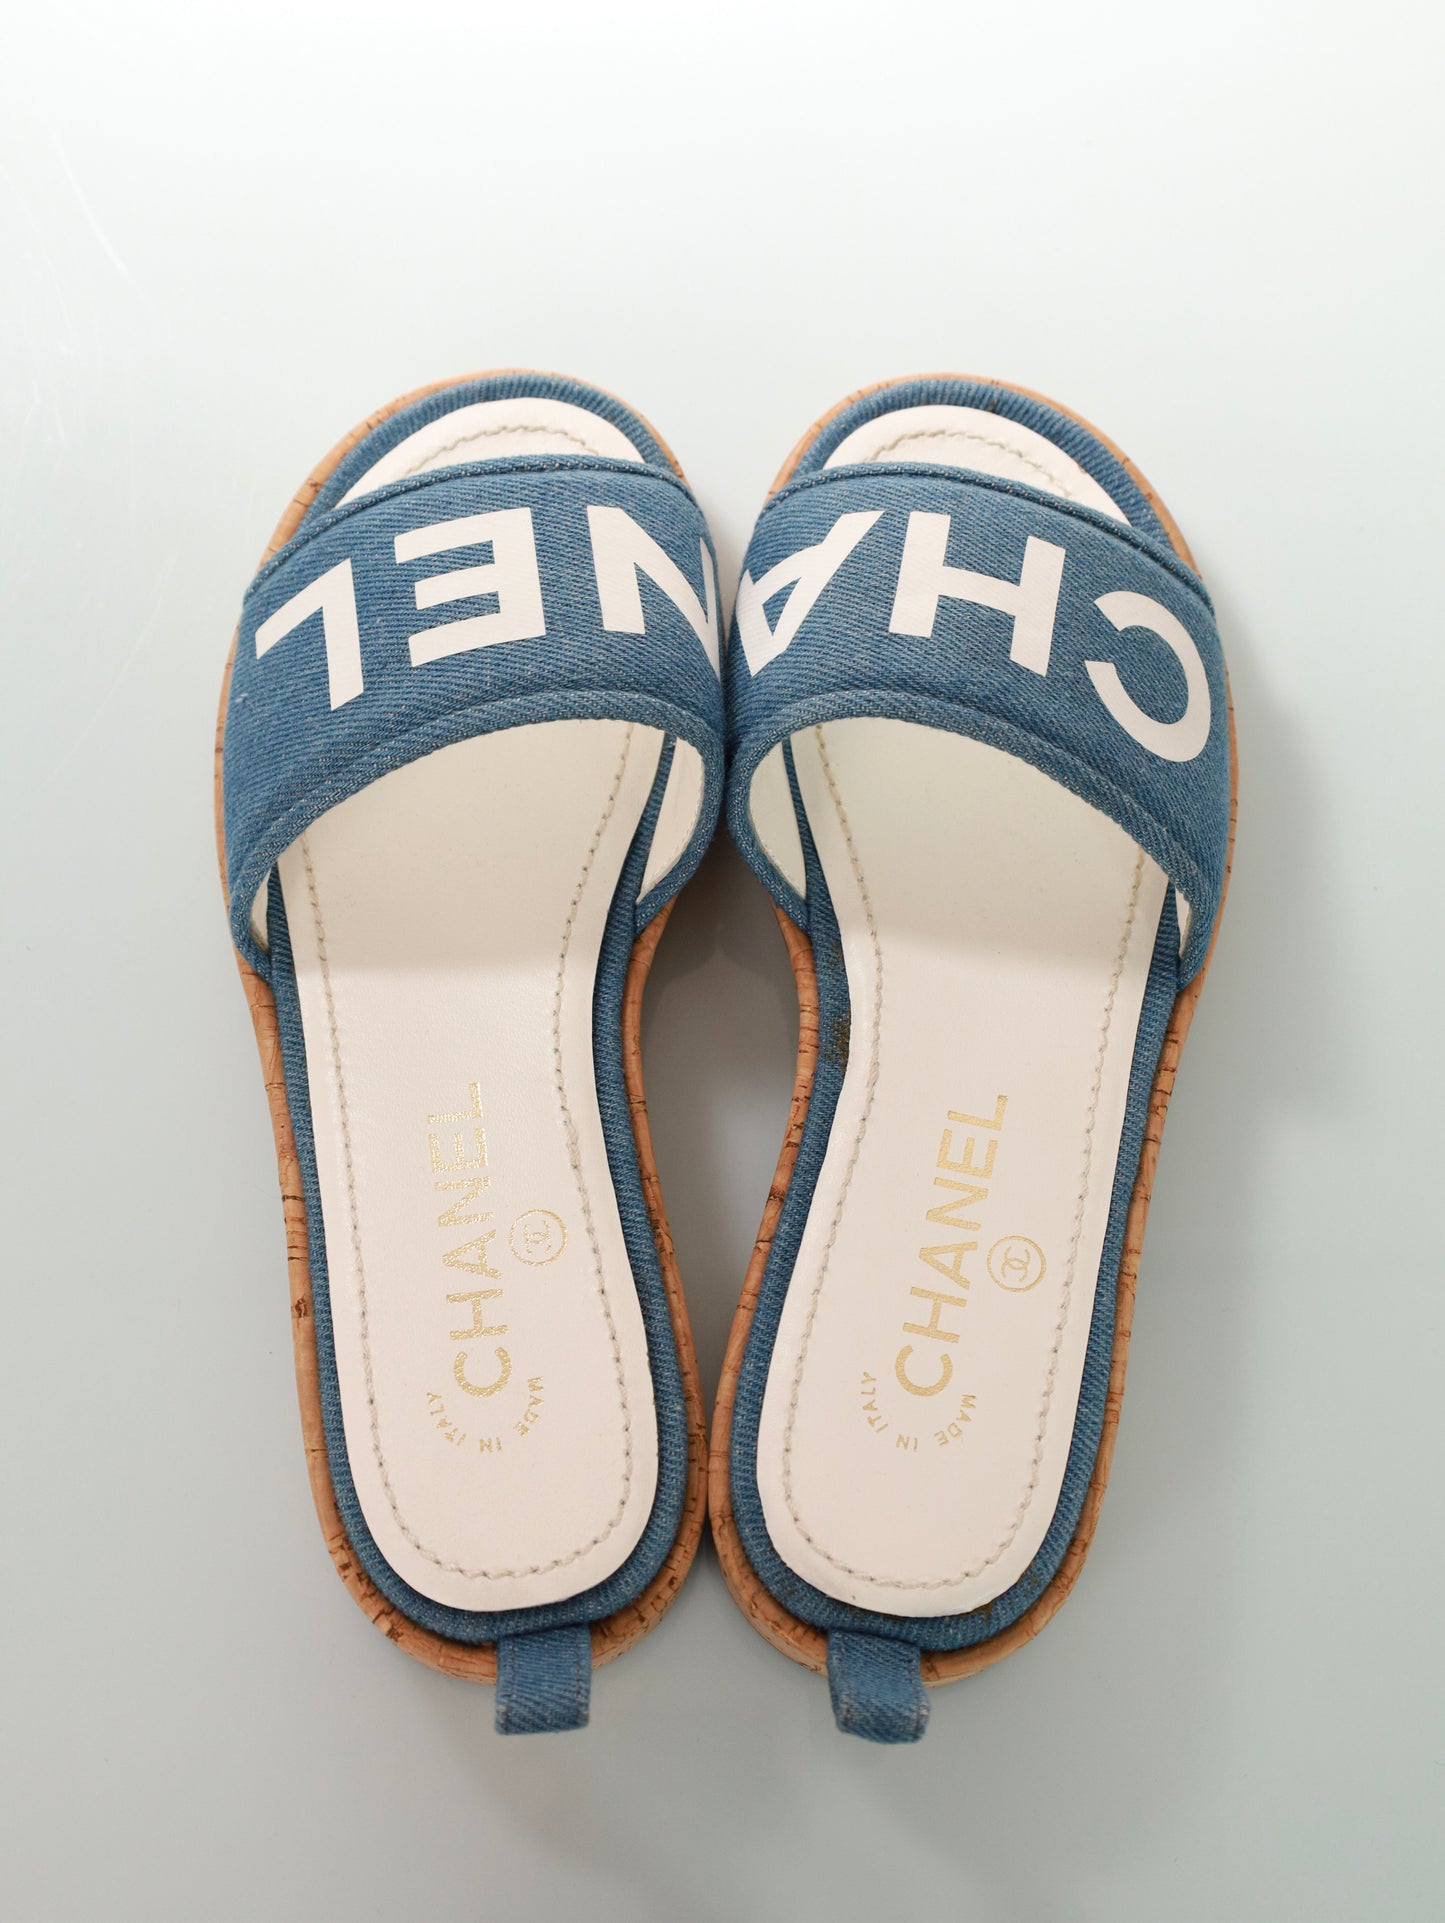 CHANEL MULES size. 36 CHANEL Sandals G34876 Mules